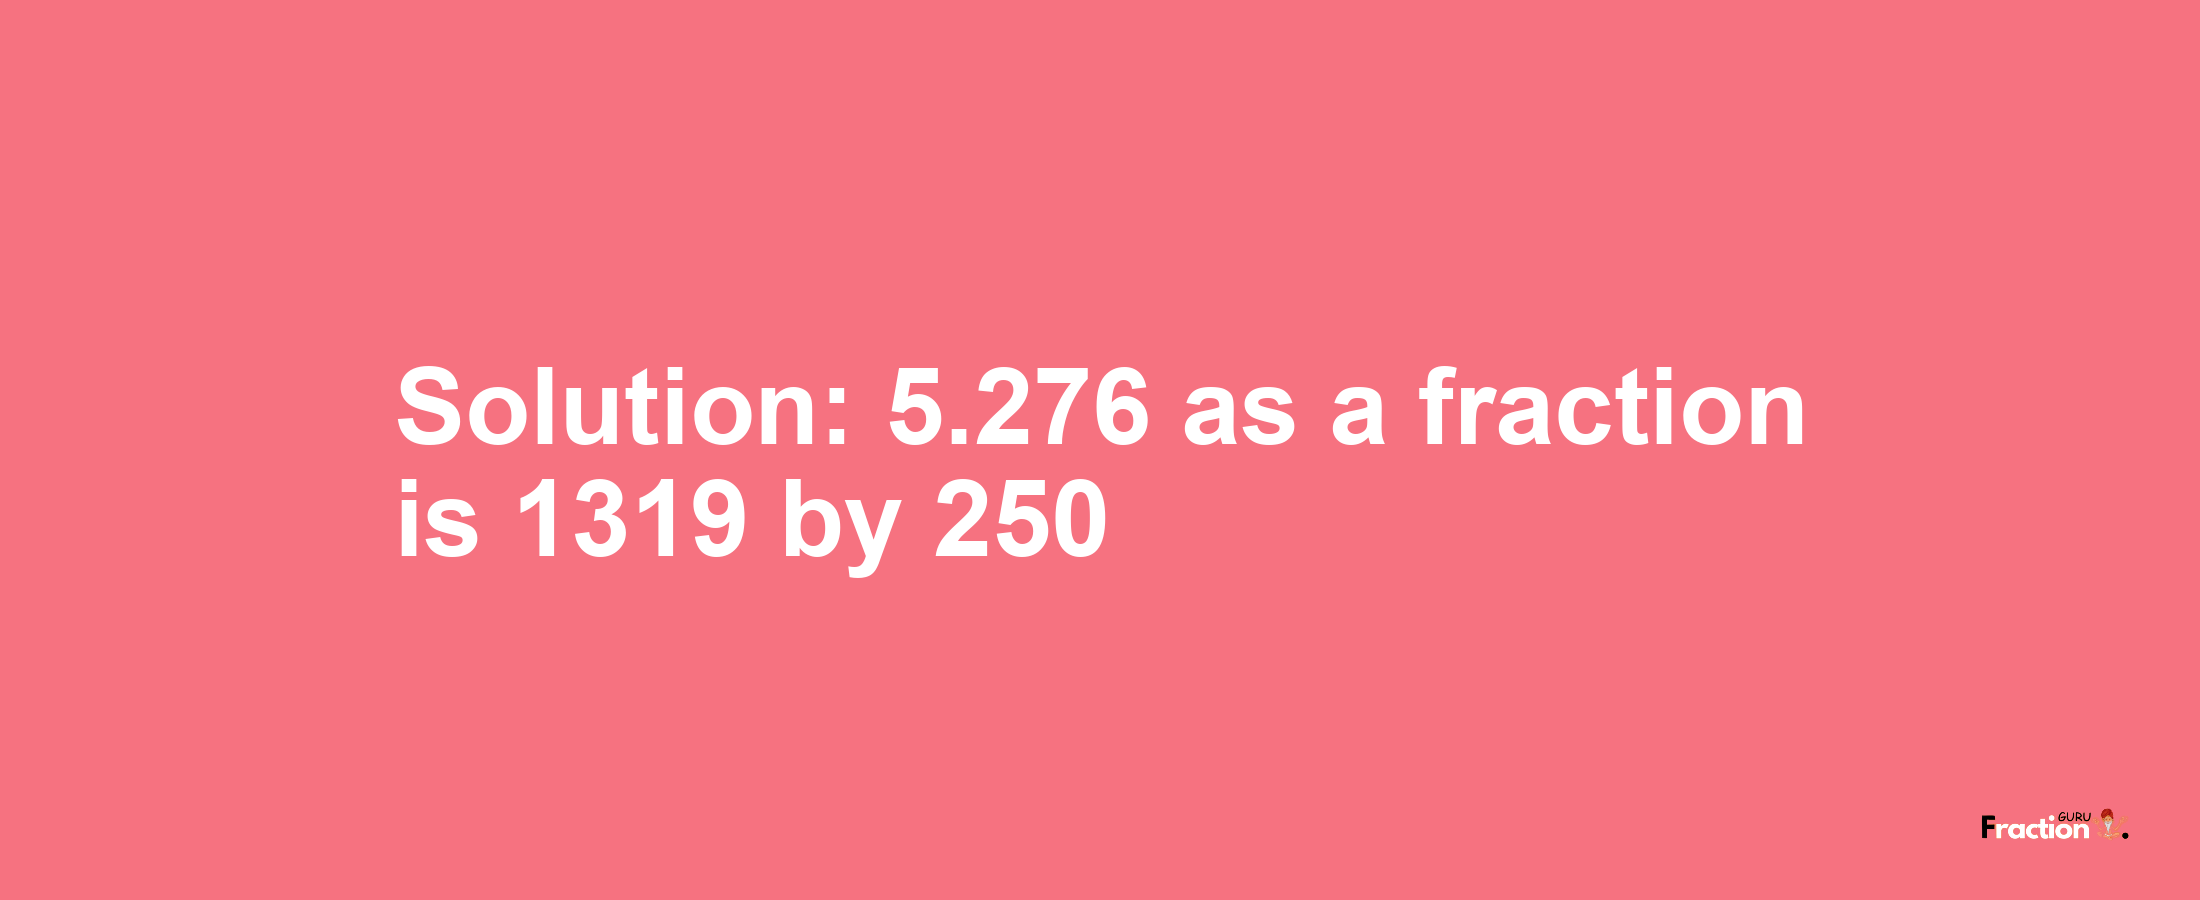 Solution:5.276 as a fraction is 1319/250